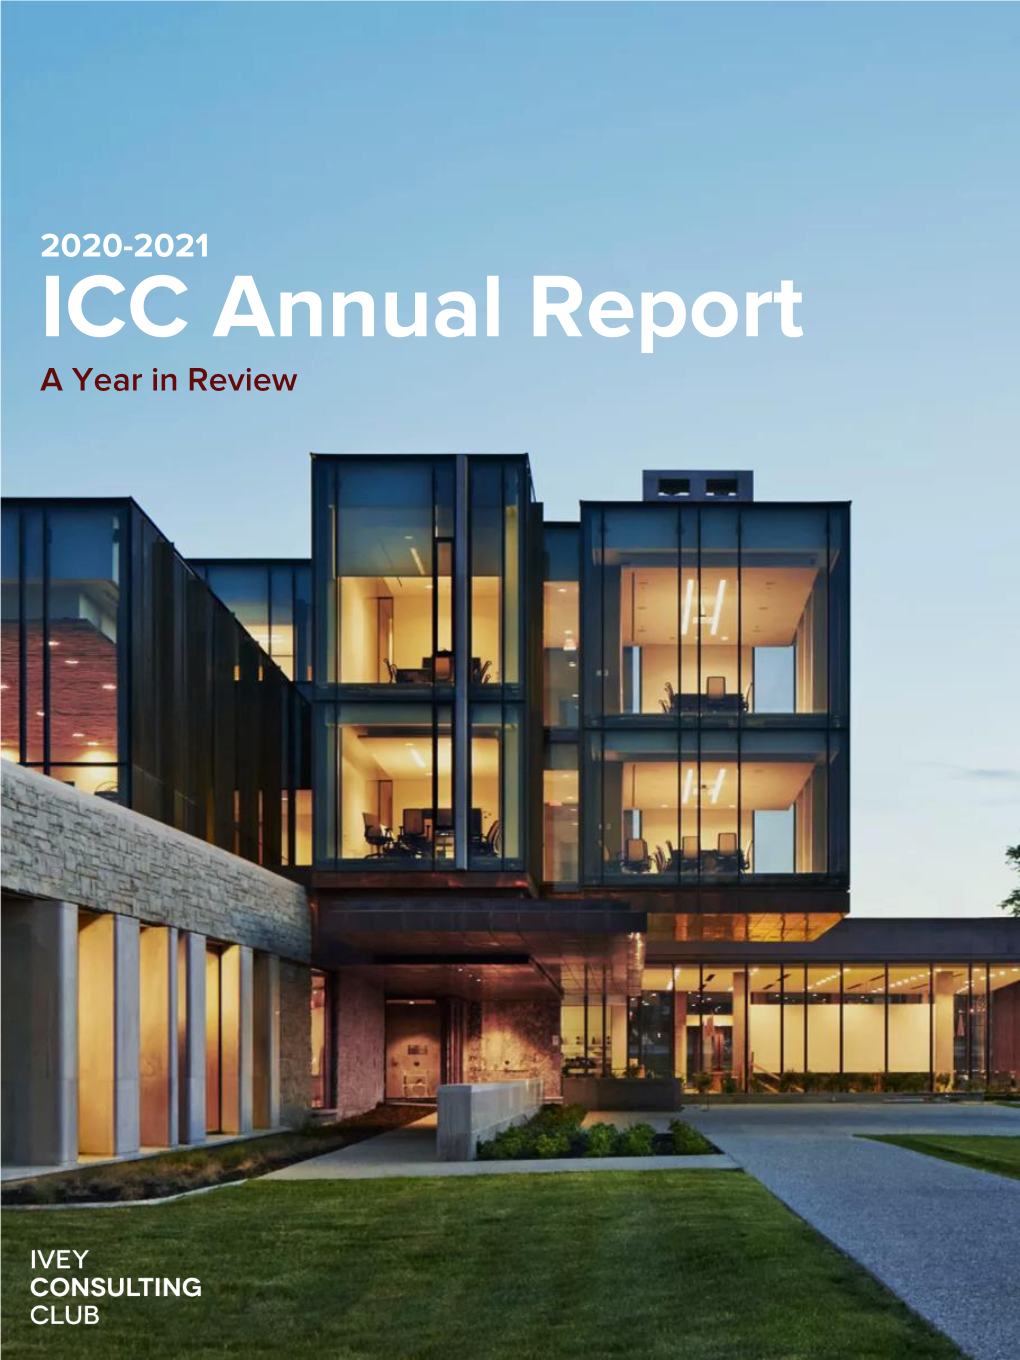 2020-2021 ICC Annual Report a Year in Review